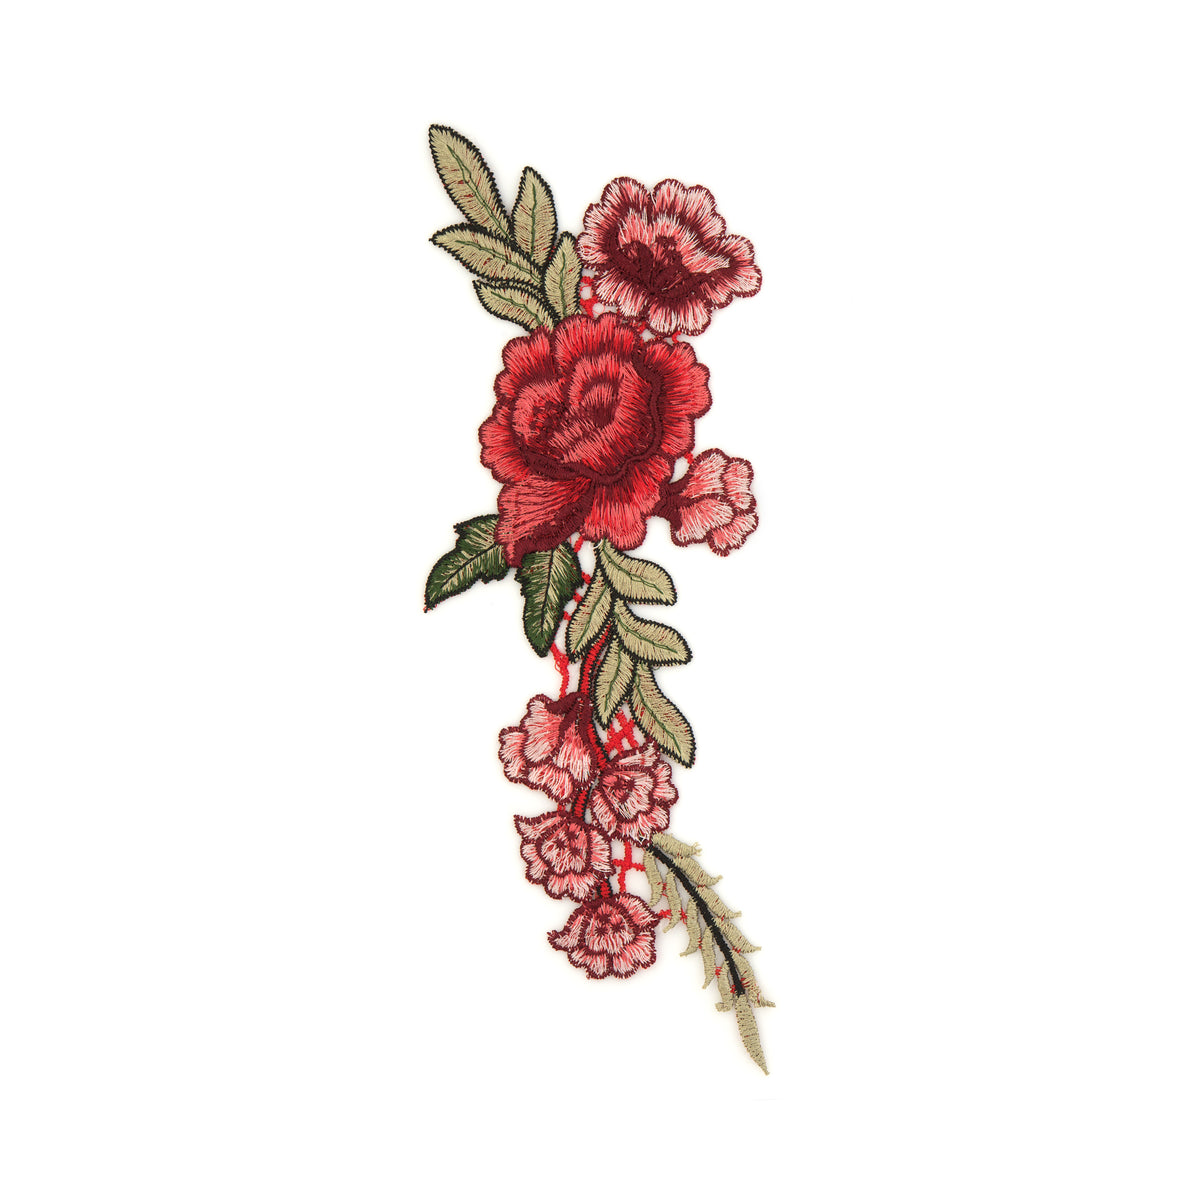 De Rosas Embroidered Iron-On Appliques